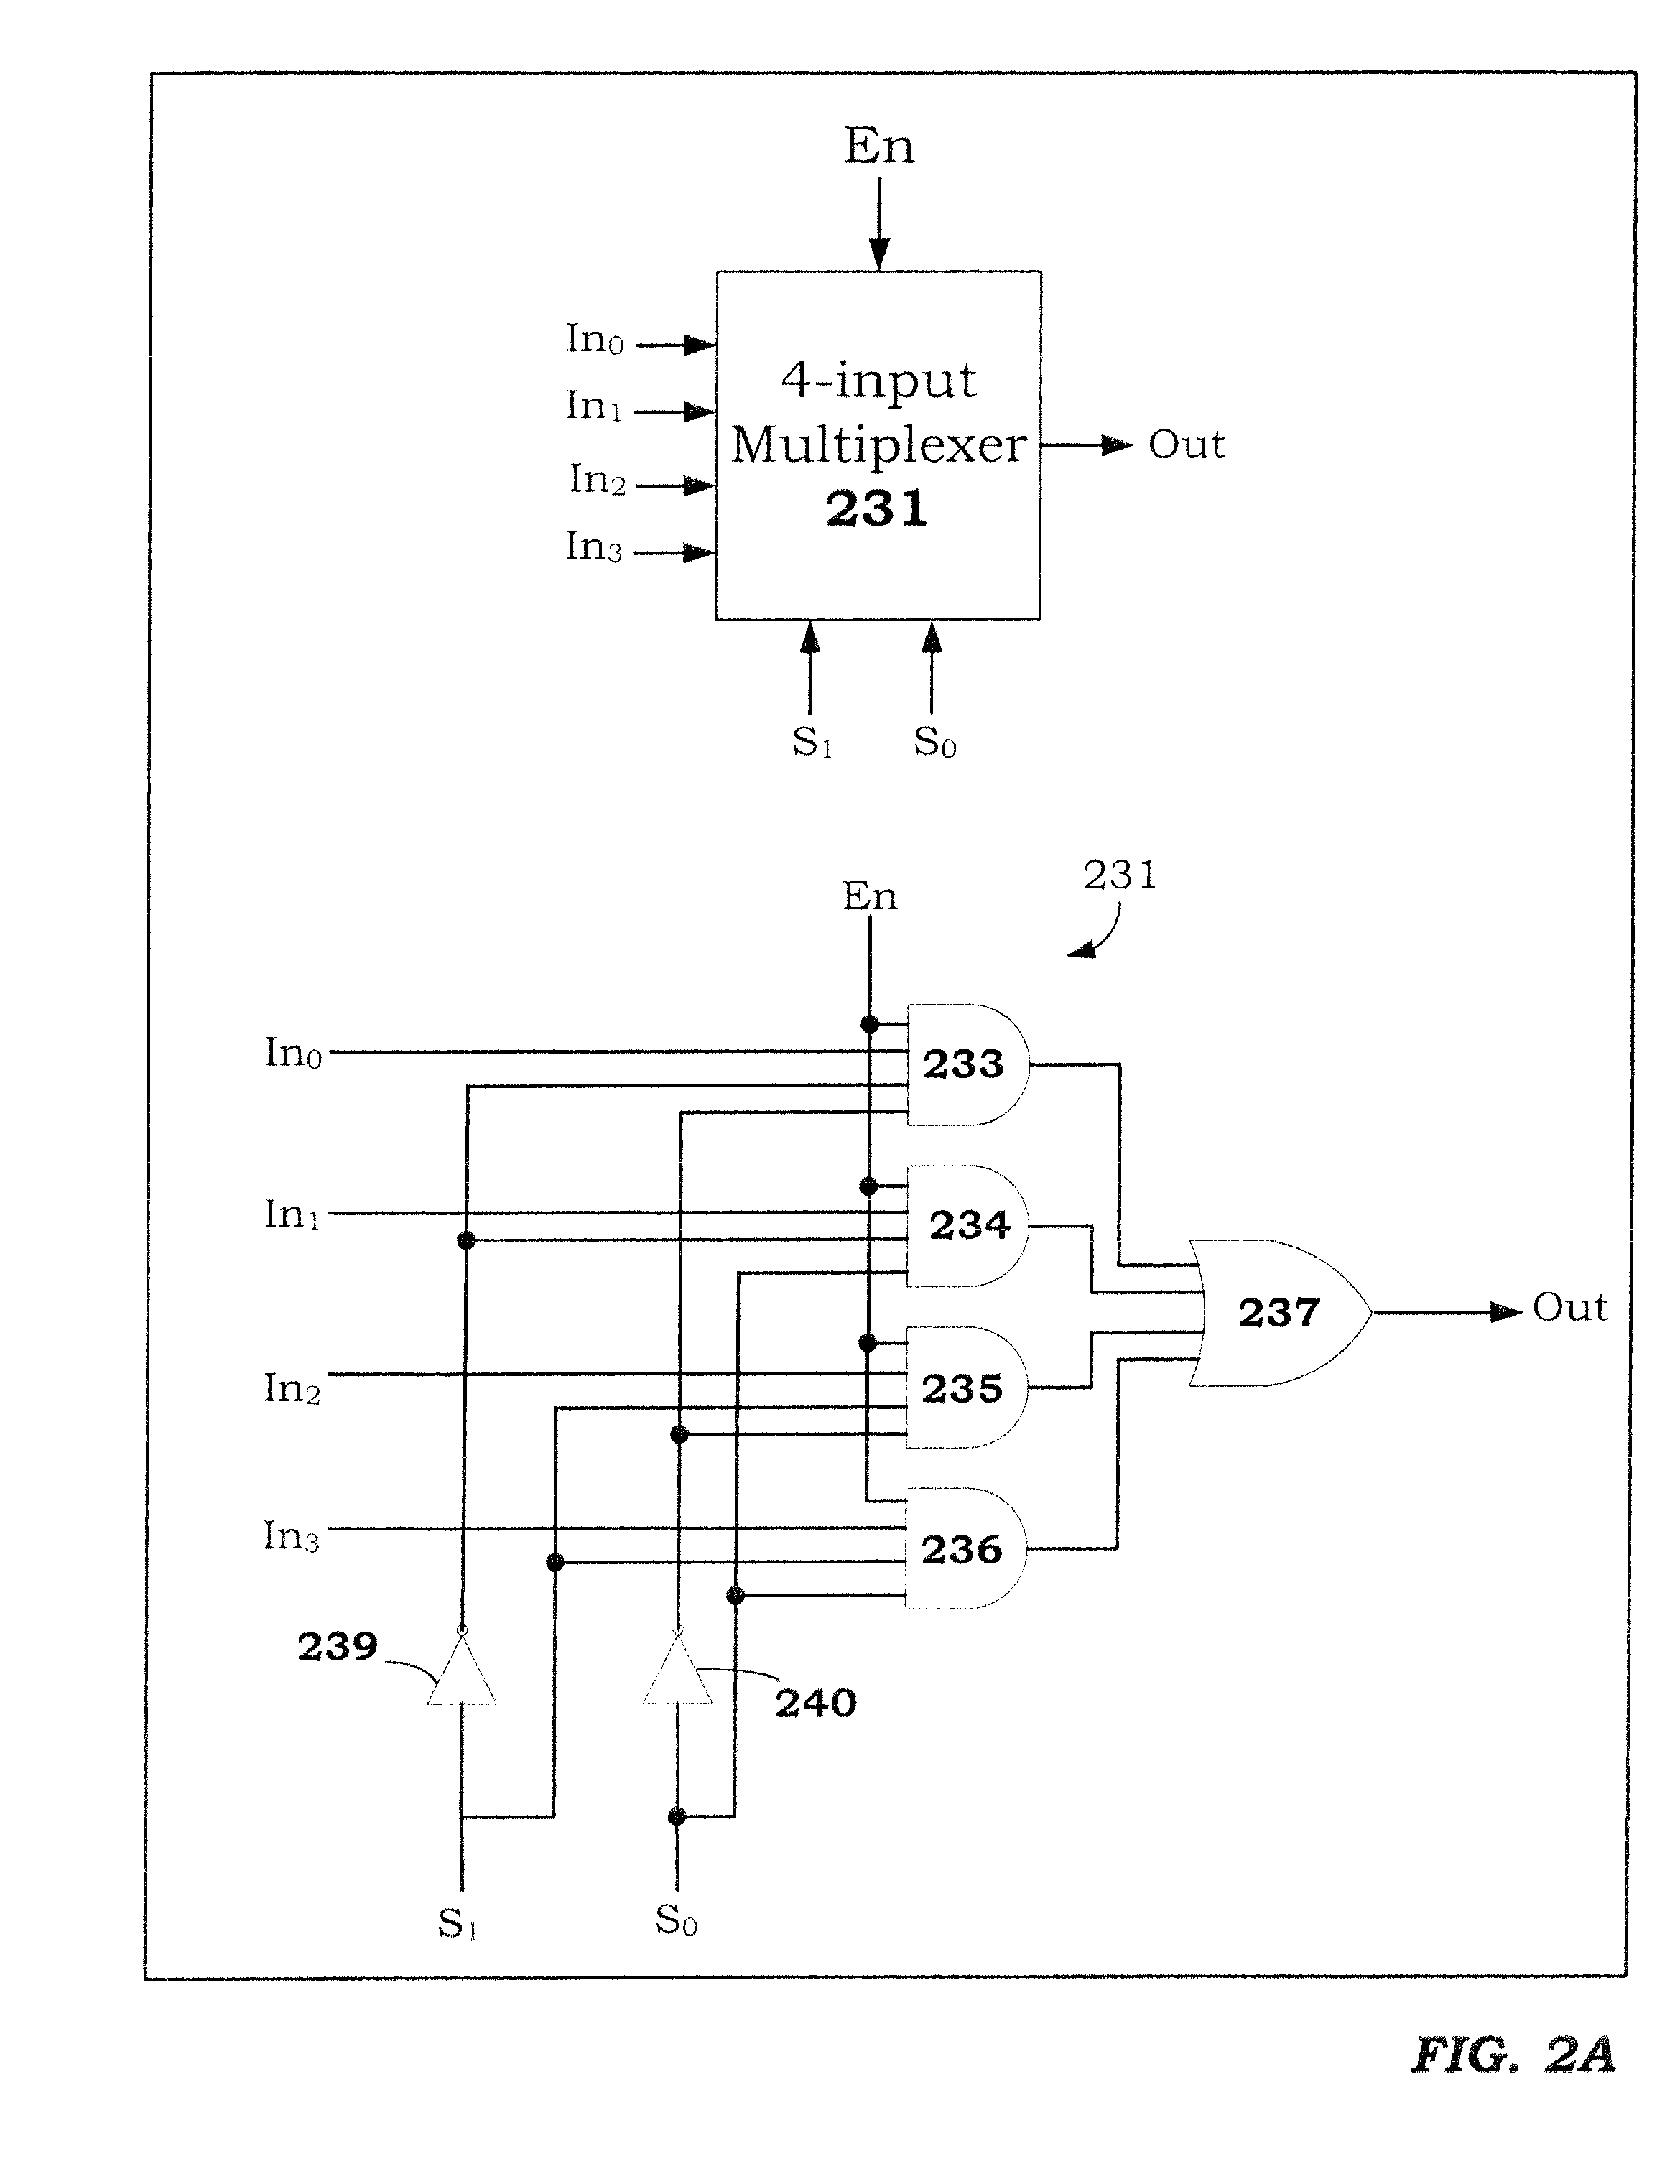 Approximate functional matching in electronic systems